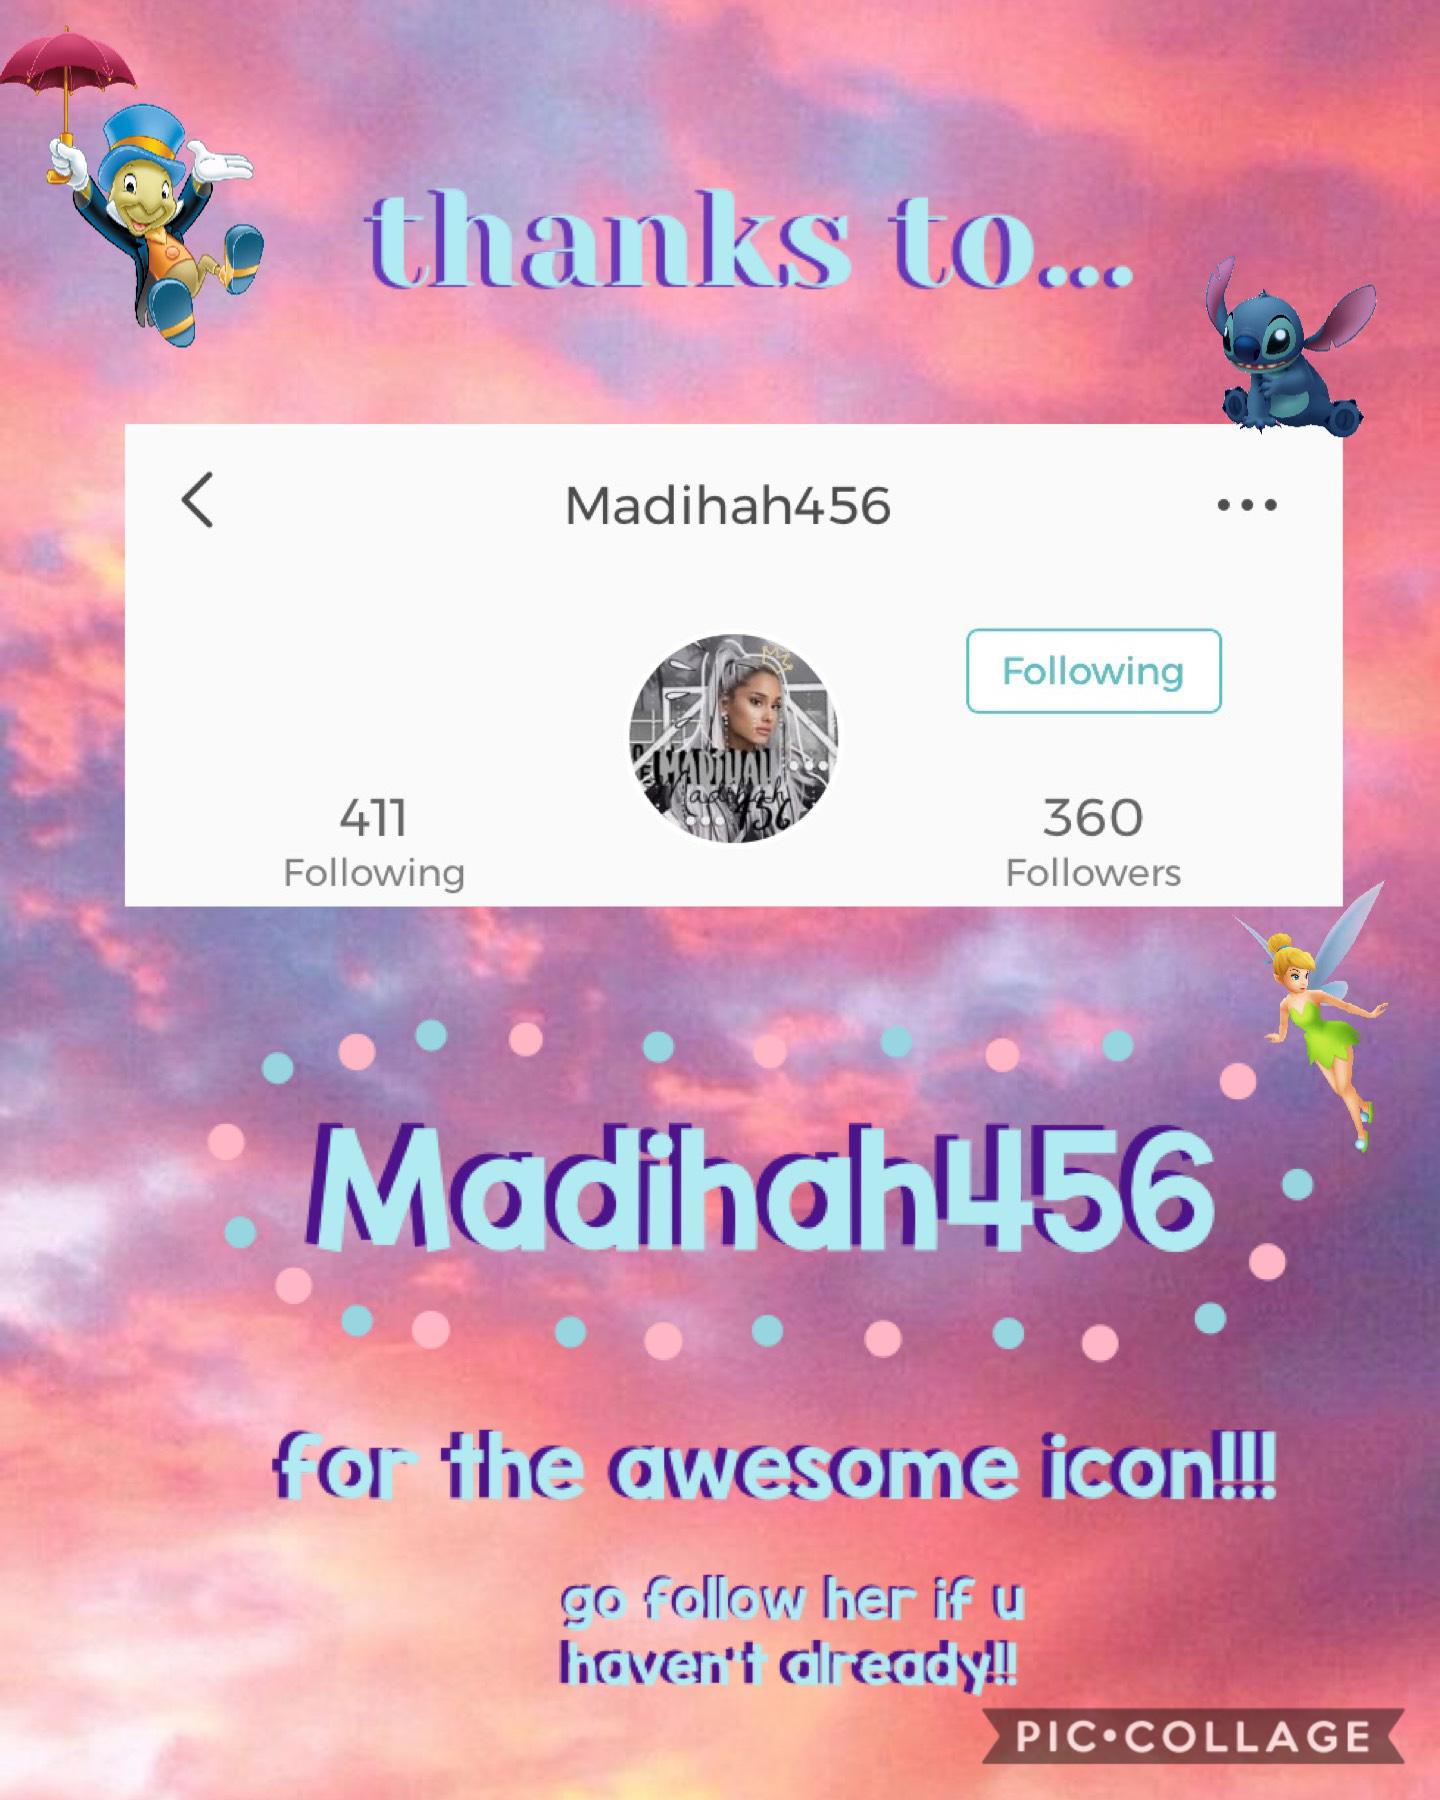 ⭐️ tap ⭐️

hey guys!!! so if u haven’t followed Madihah456 yet u rly should because she is super talented and super nice. Also here’s a little secret... I am @emoji_addict 🤫 and if u don’t believe me... i’ll try and prove it to u just lmk... welp, i hope 